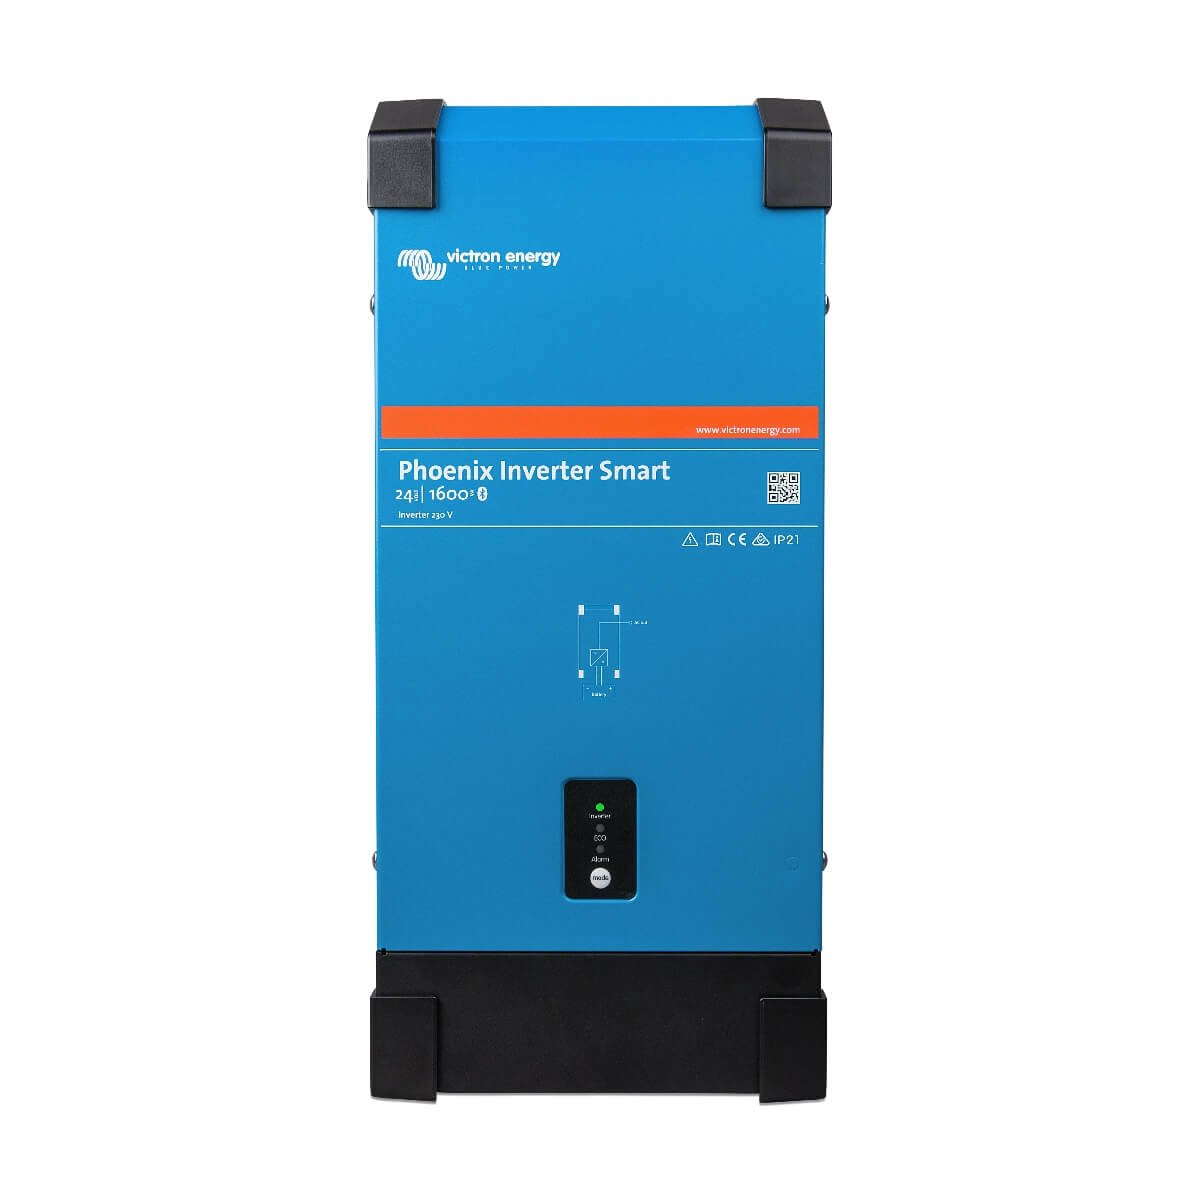 A blue Victron 24V 1600VA Inverter - Pure Sine Wave Phoenix Inverter Smart, model number 24V 1600VA, featuring a digital display and control buttons. This efficient Victron 24V 1600W Inverter provides reliable power conversion for various applications.